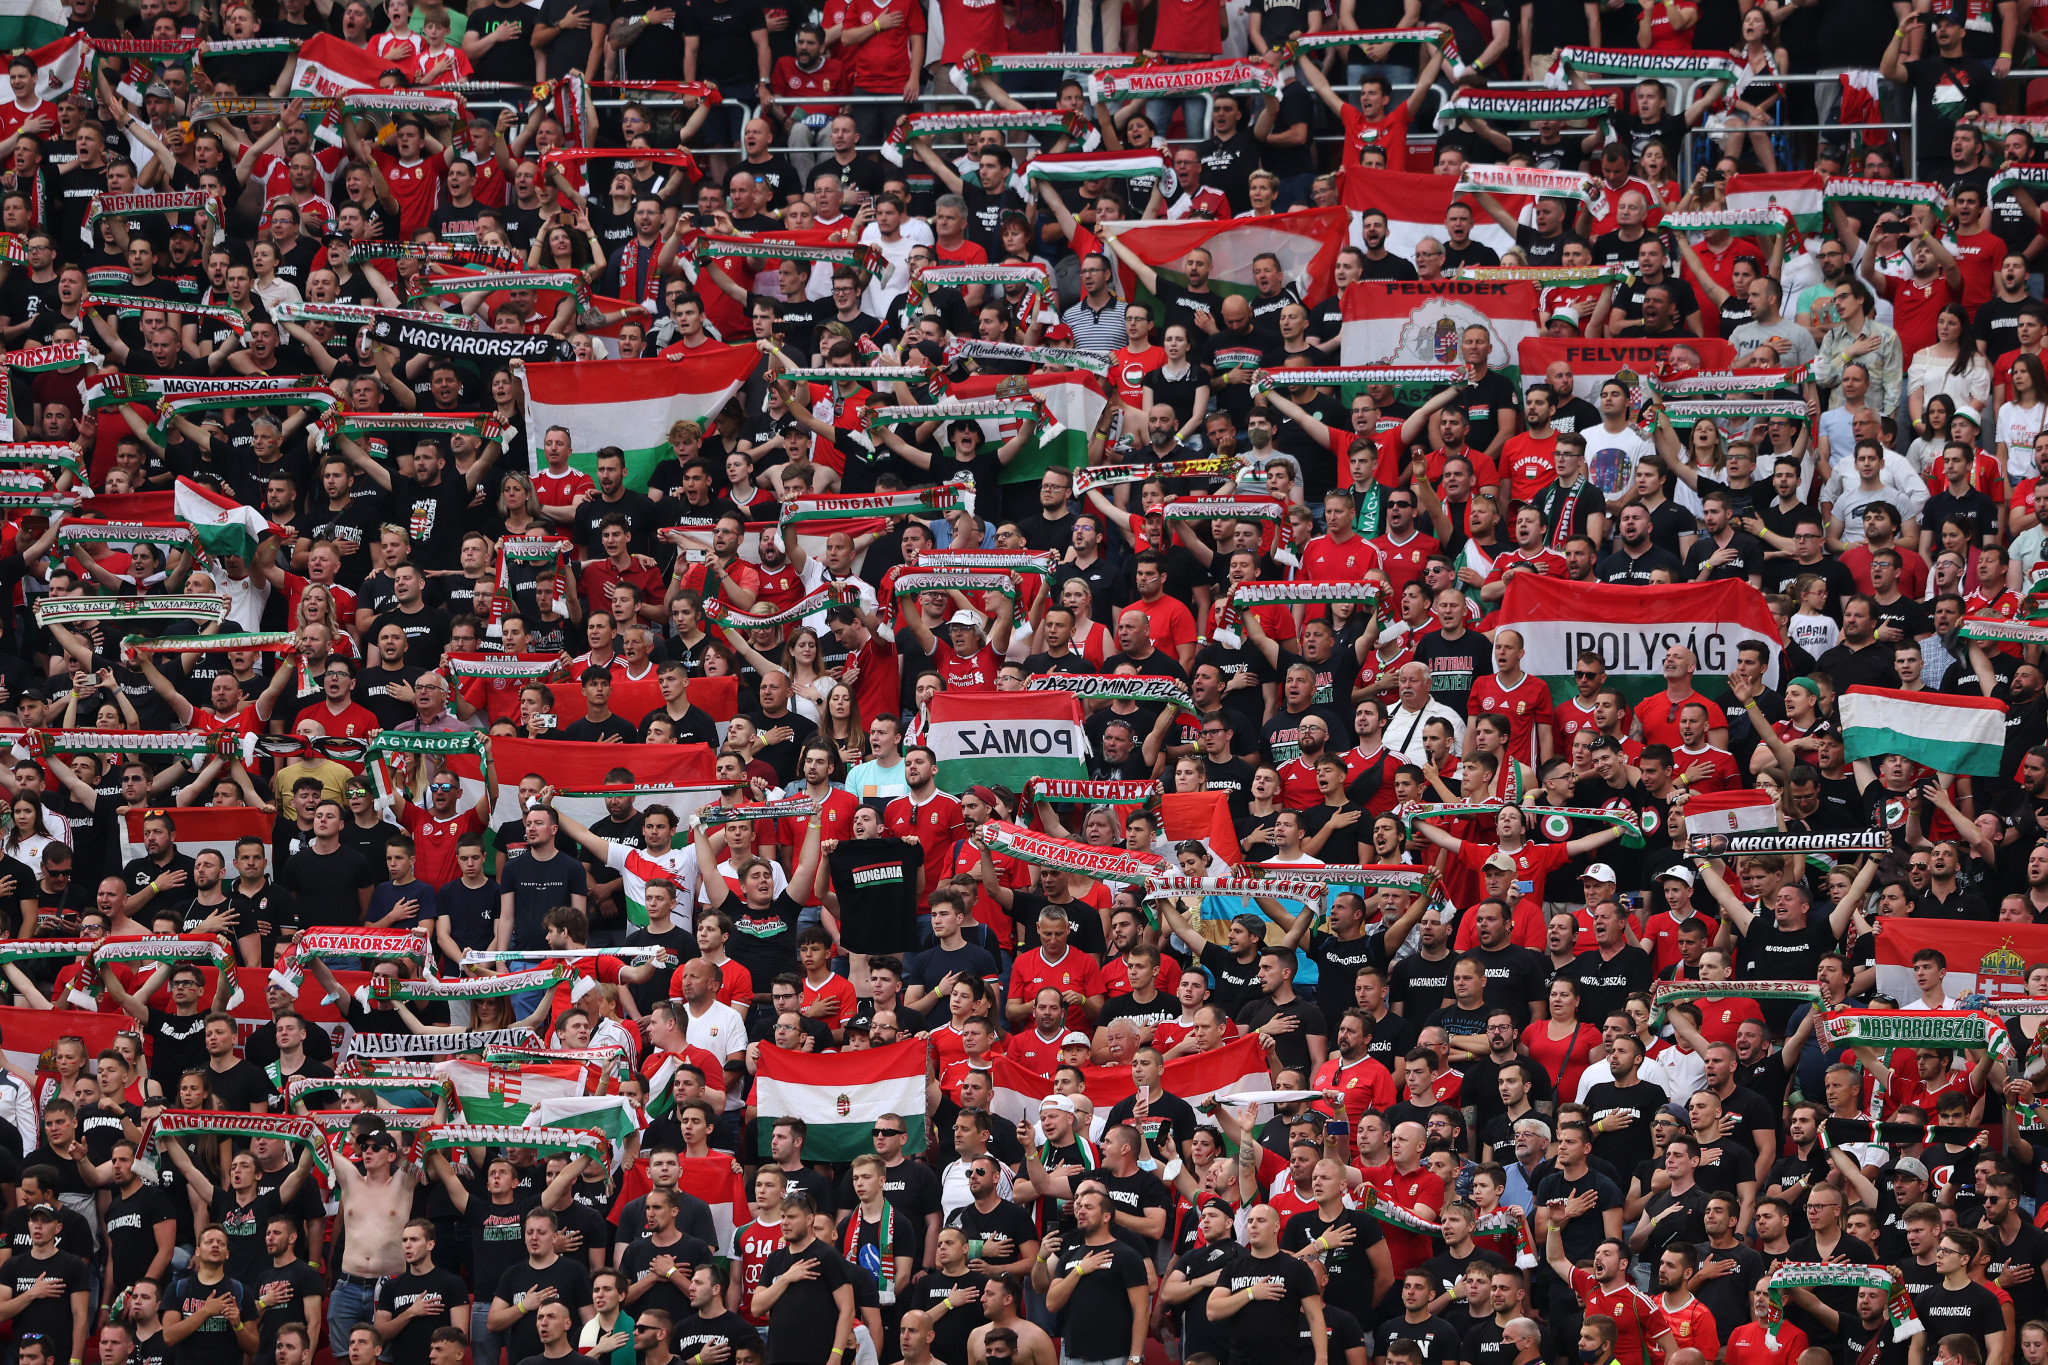 UEFA give Hungary two-game spectator ban for homophobic and racist abuse